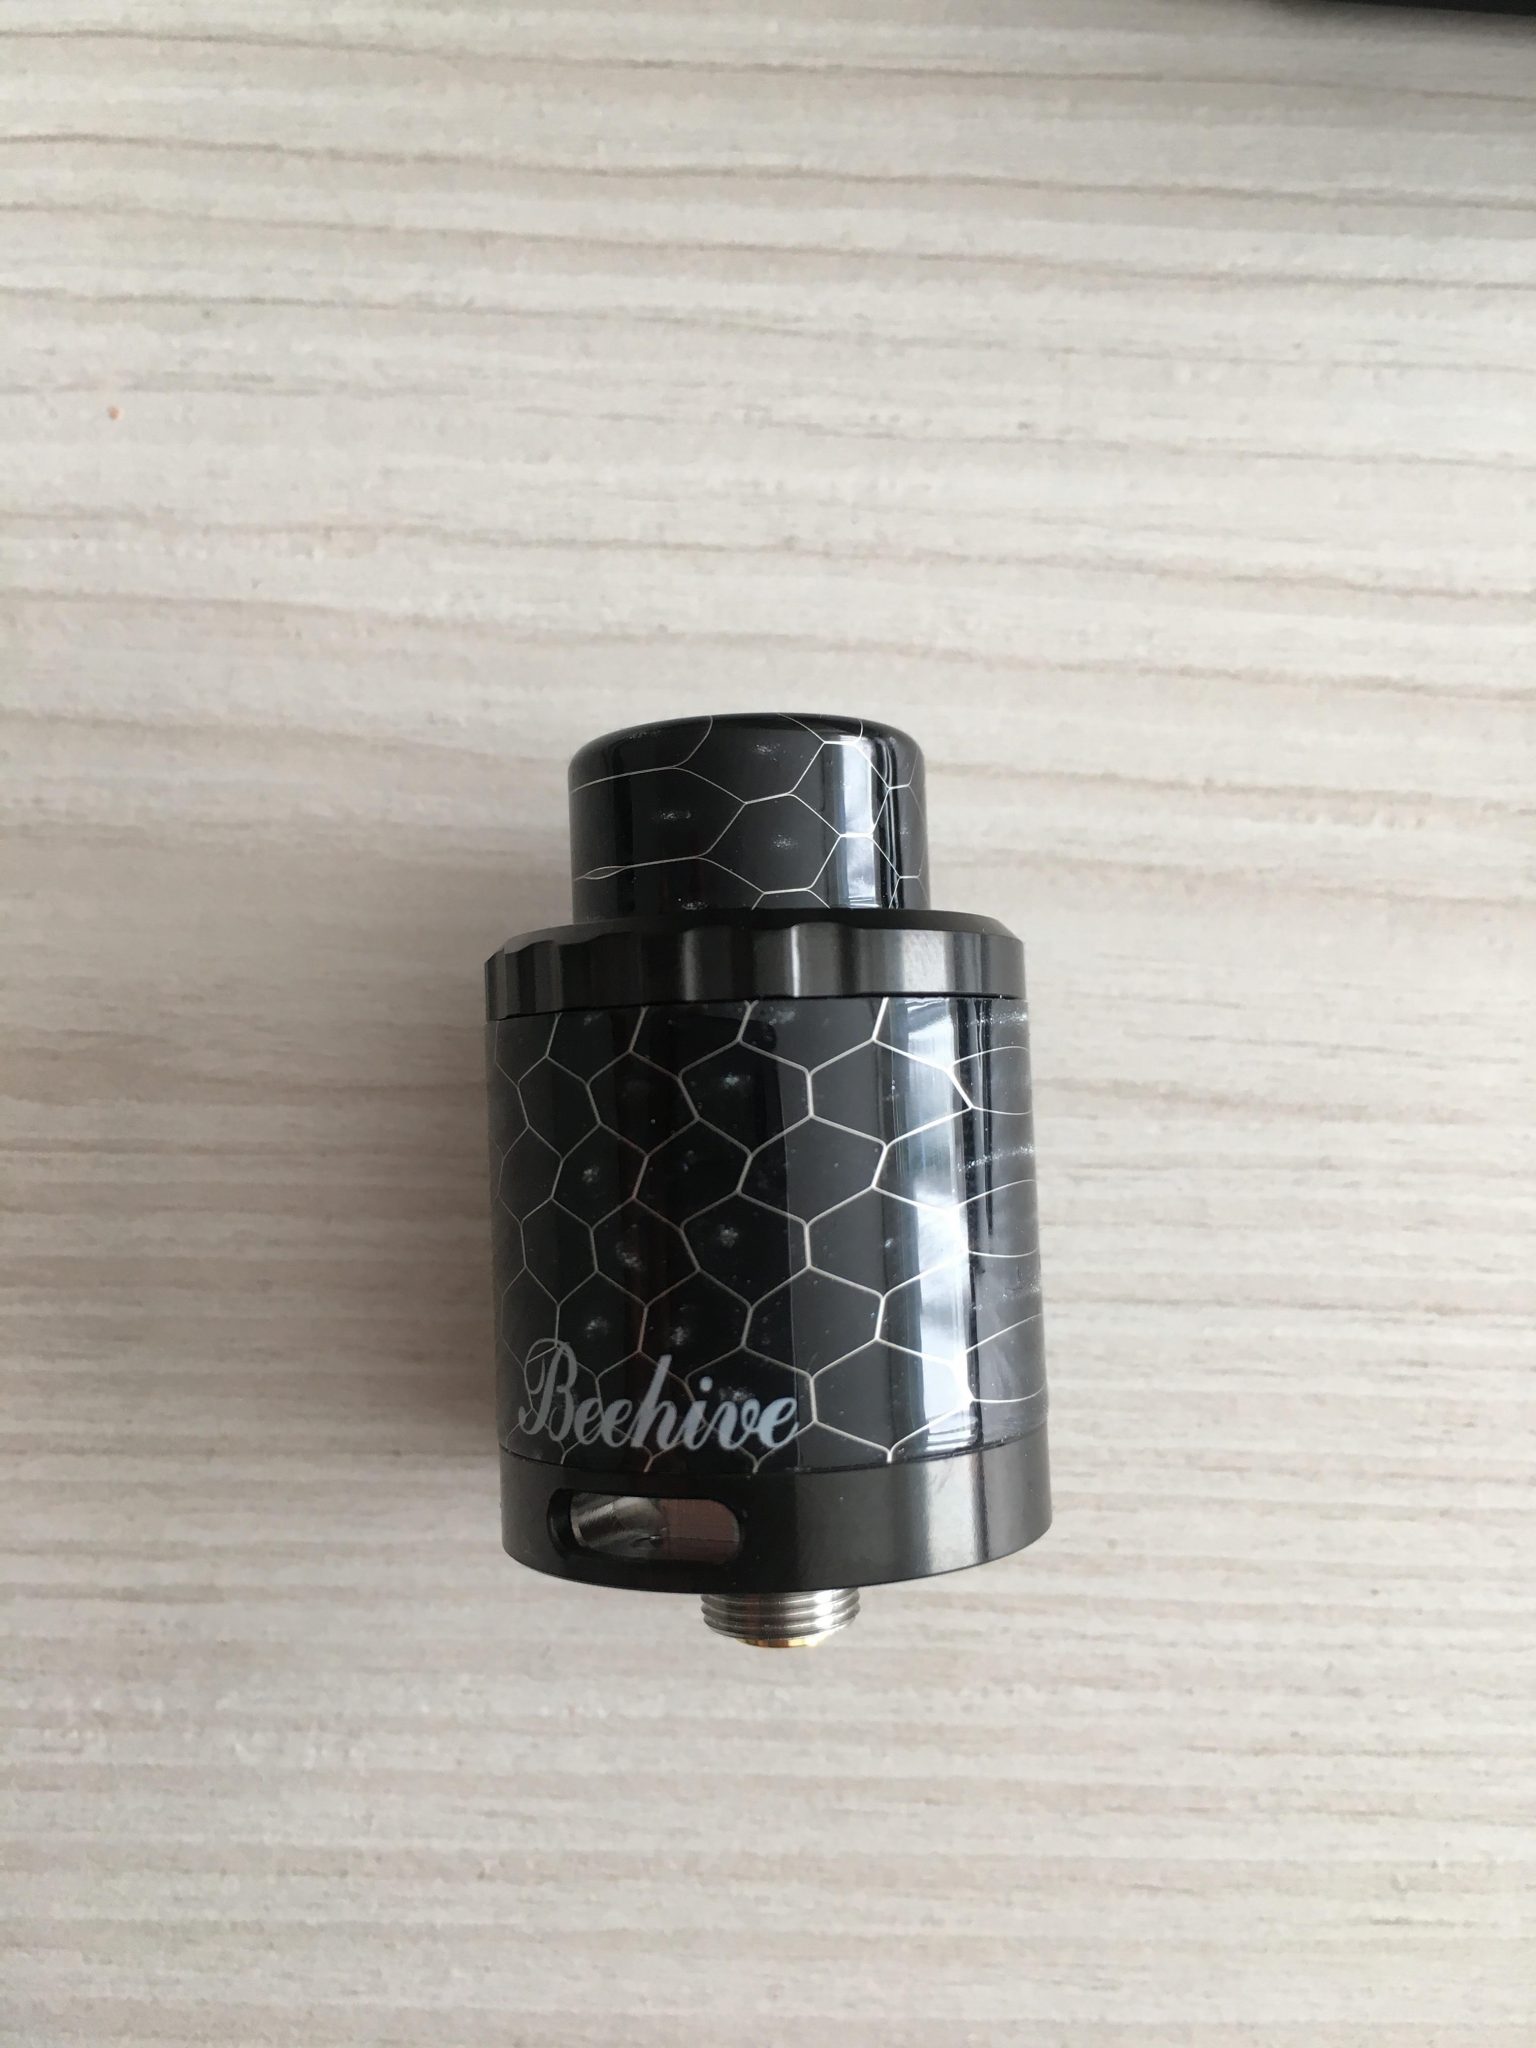 Aleader Bhive Review